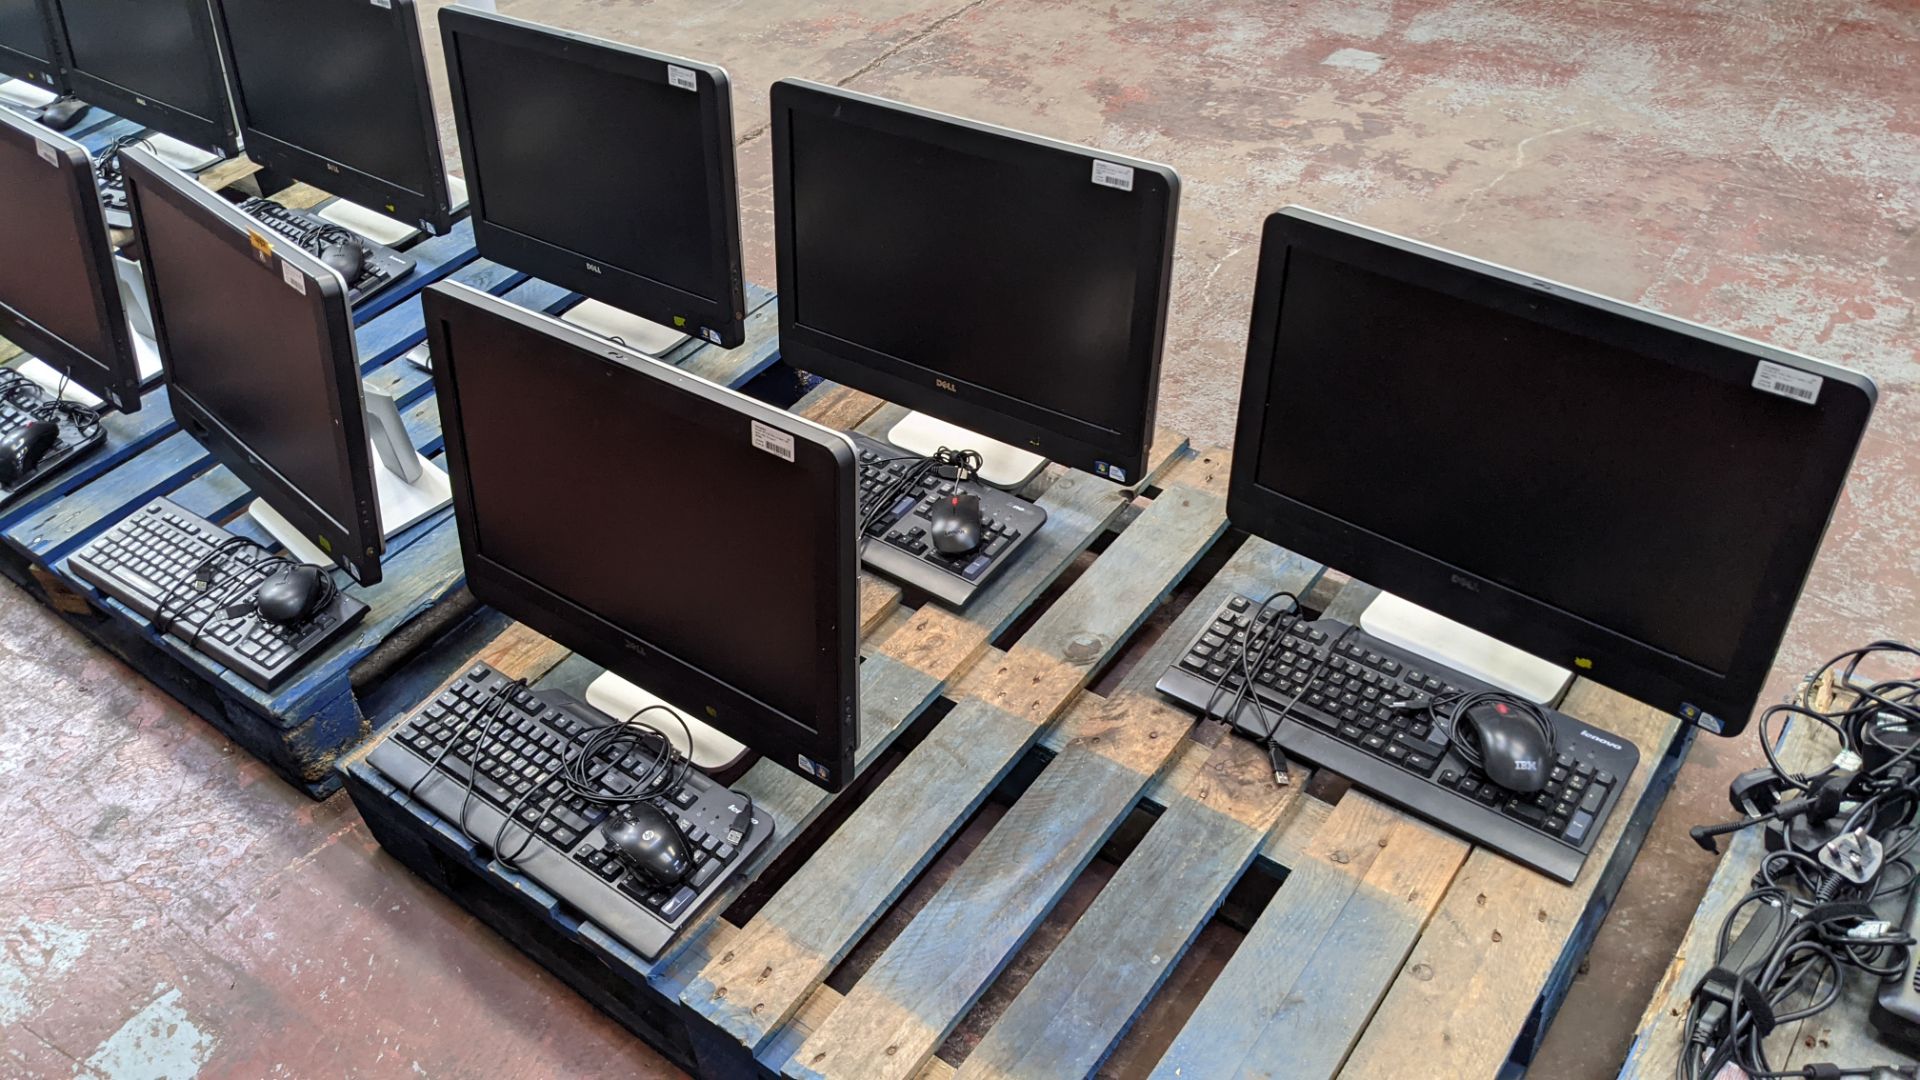 5 off Dell all-in-one computers each with built-in 23" widescreen display. Optiplex 9010 with Penti - Image 3 of 11